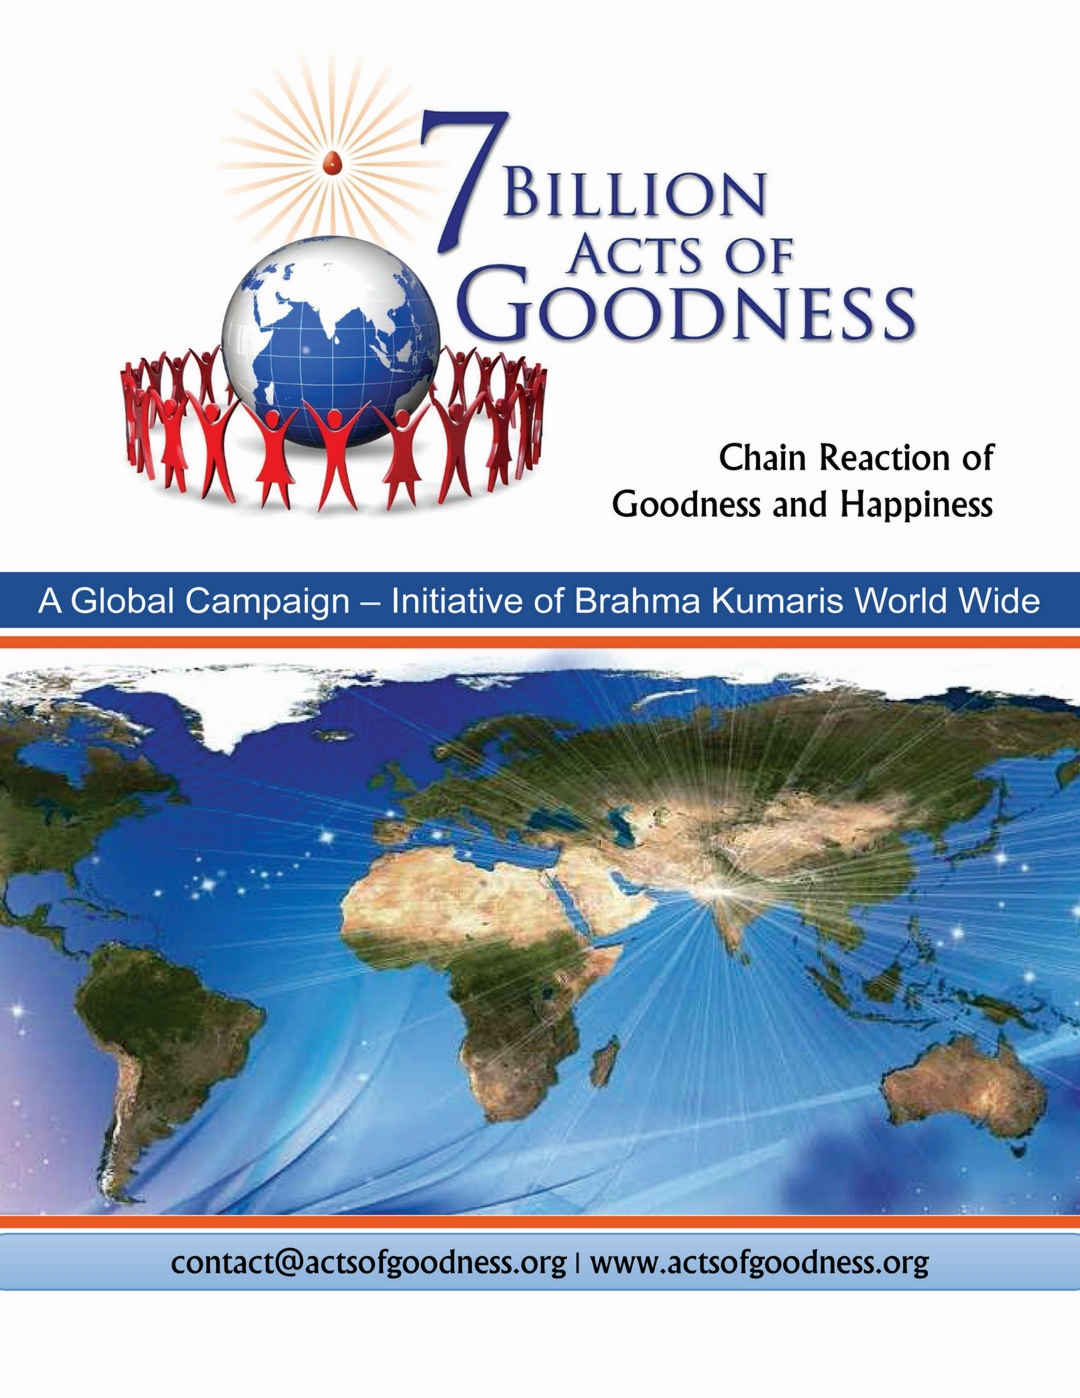 7 bn acts of goodness - 1